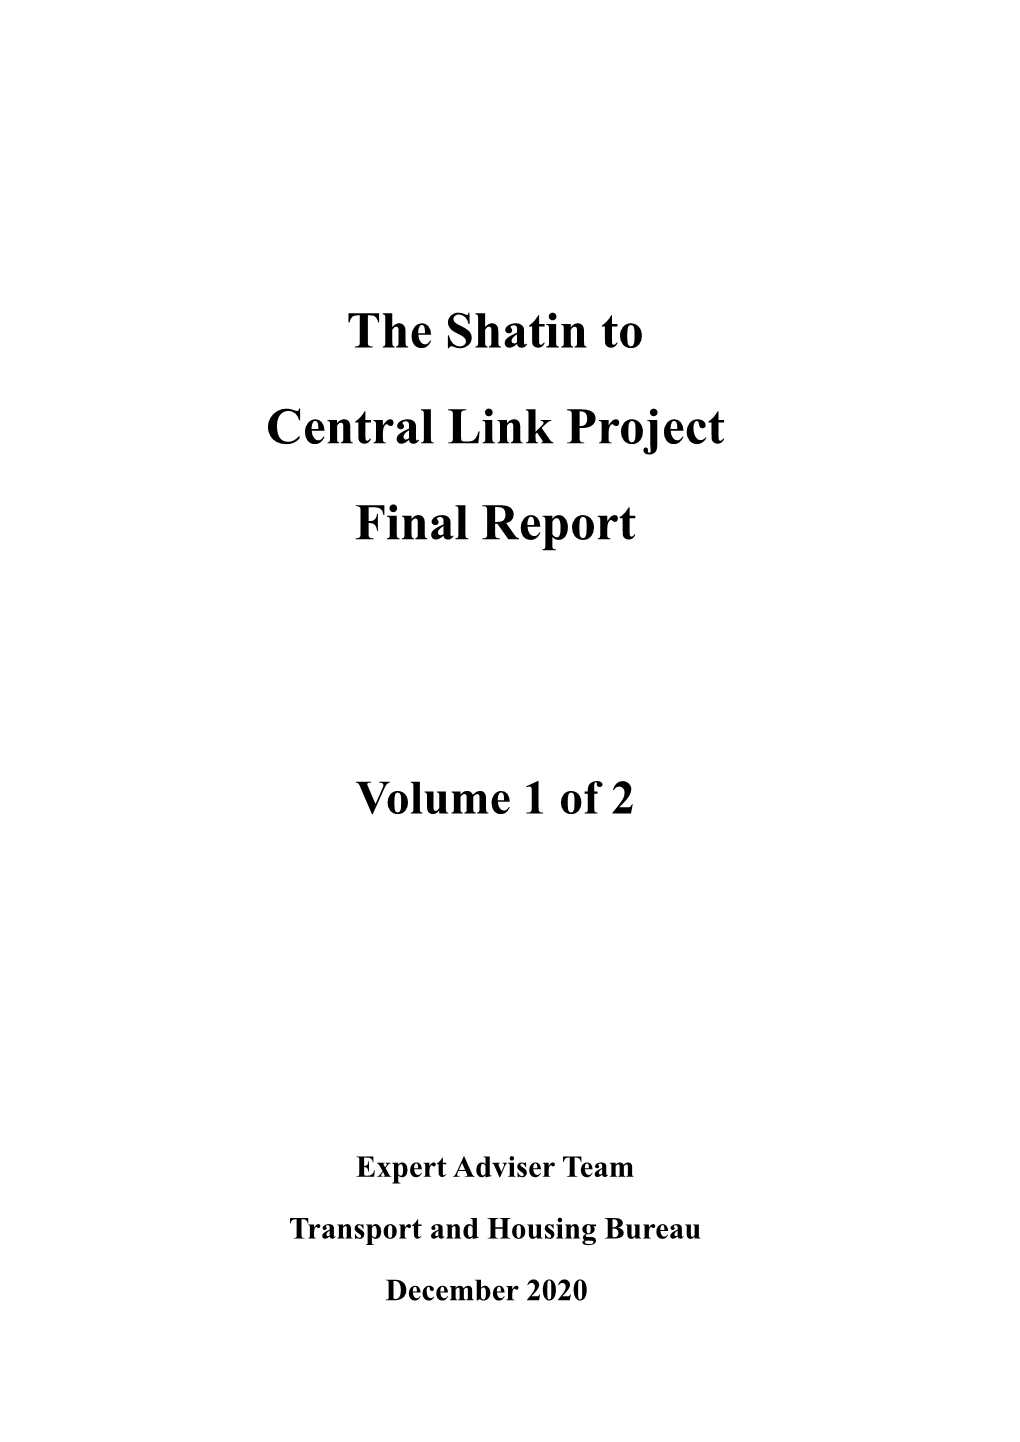 The Shatin to Central Link Project Final Report